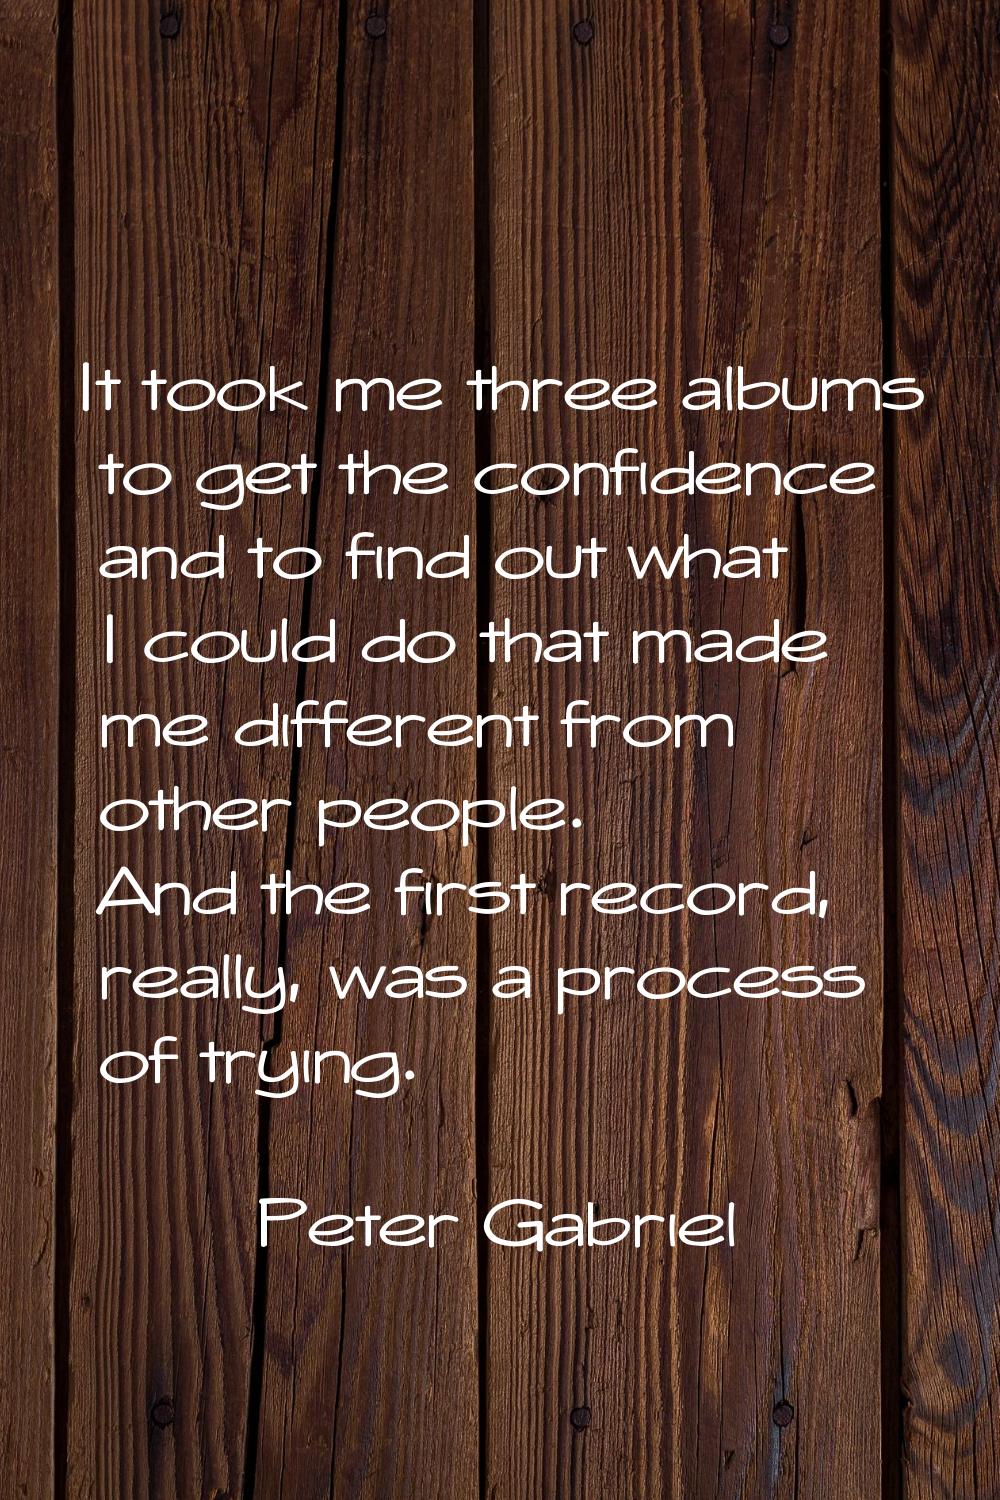 It took me three albums to get the confidence and to find out what I could do that made me differen